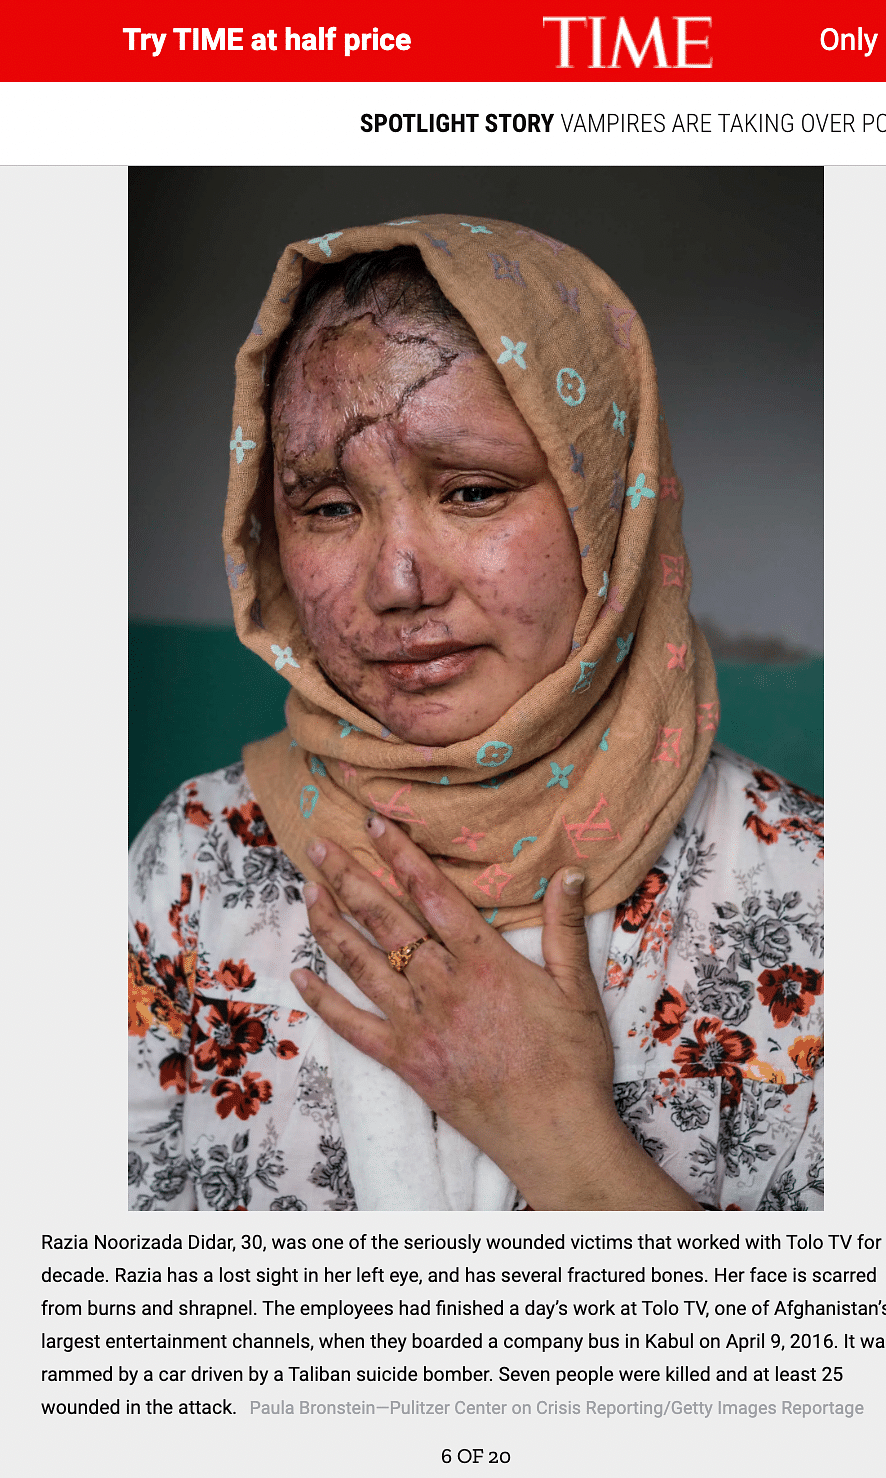 The photo is from 2016, and shows a woman who was severely injured in a suicide bombing attack on 20 January 2016.